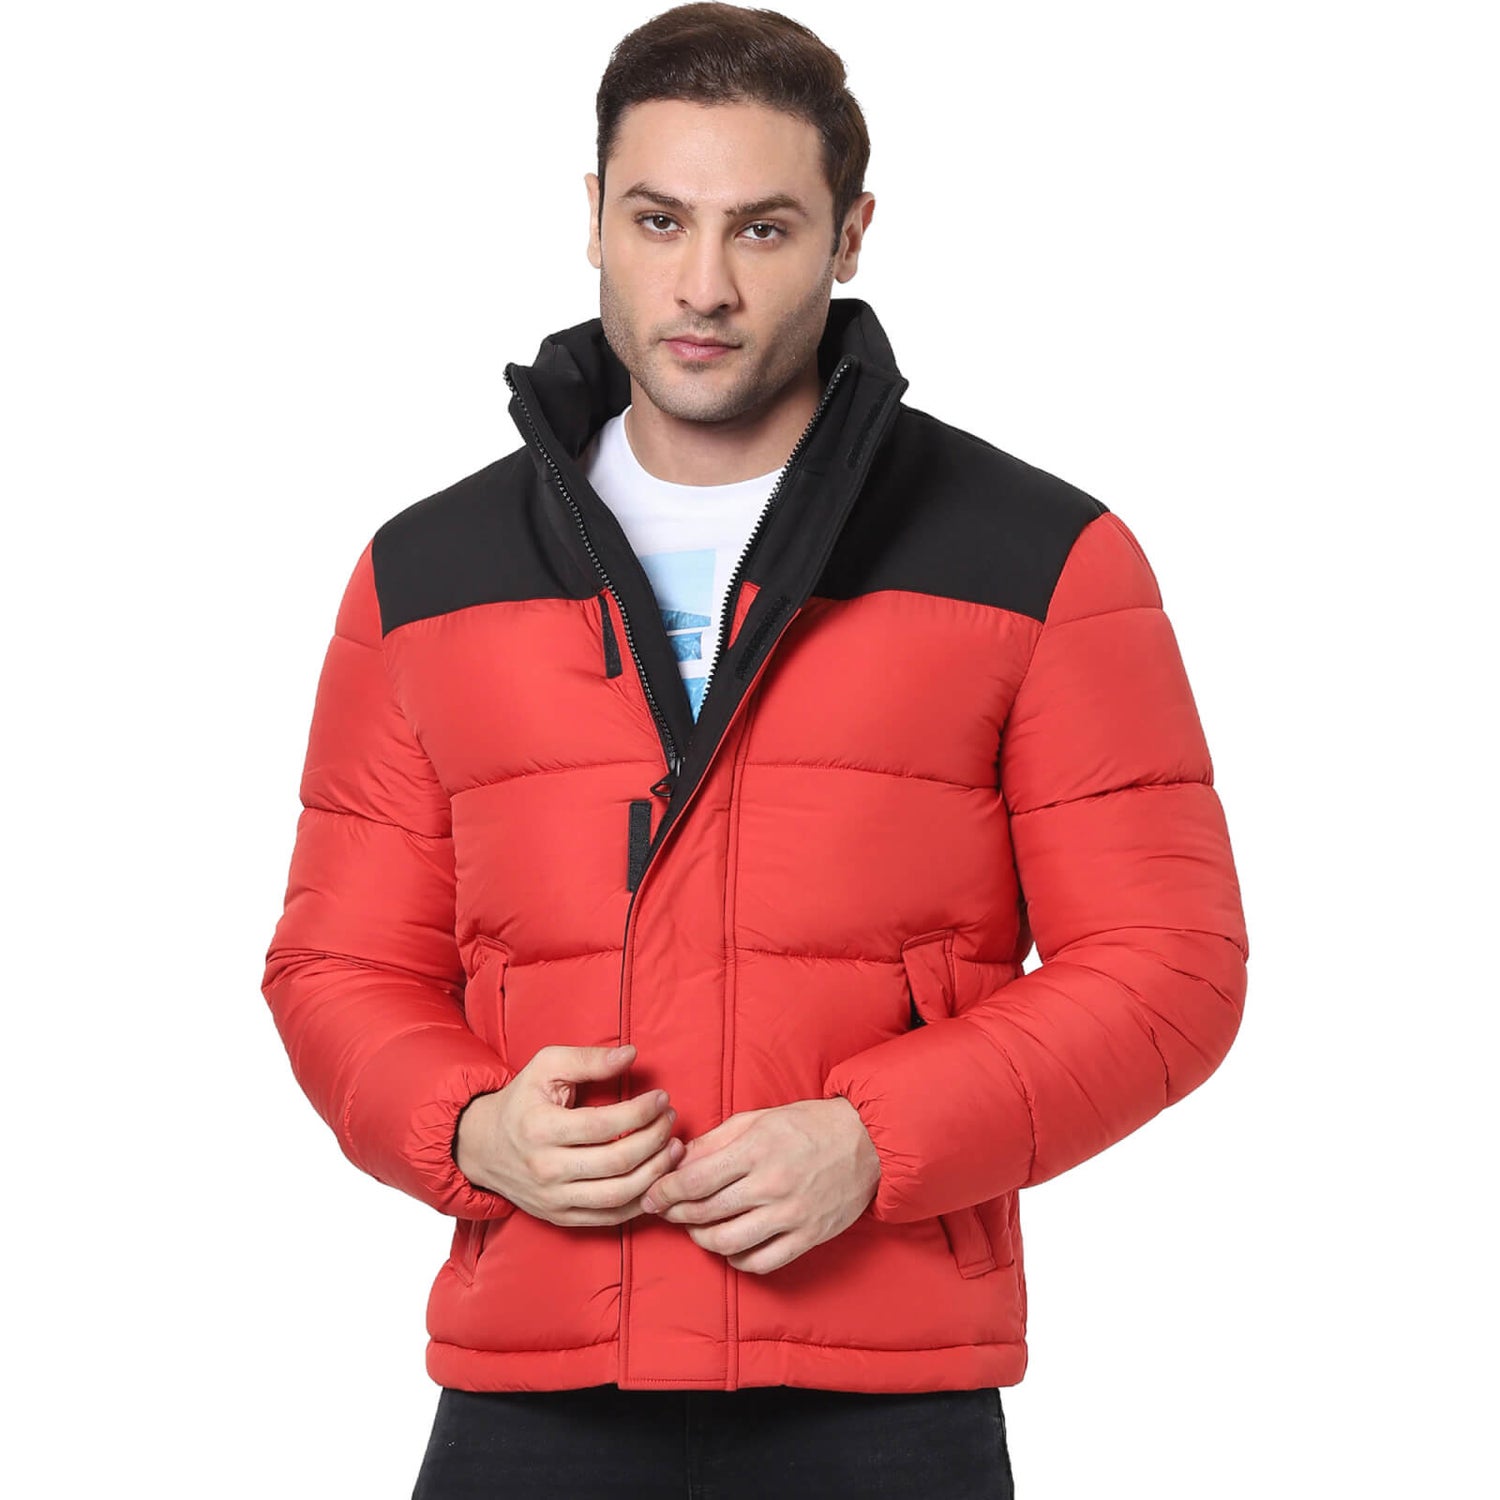 Buy Celio Solid Blue Long Sleeves Sherpa Jacket at Amazon.in